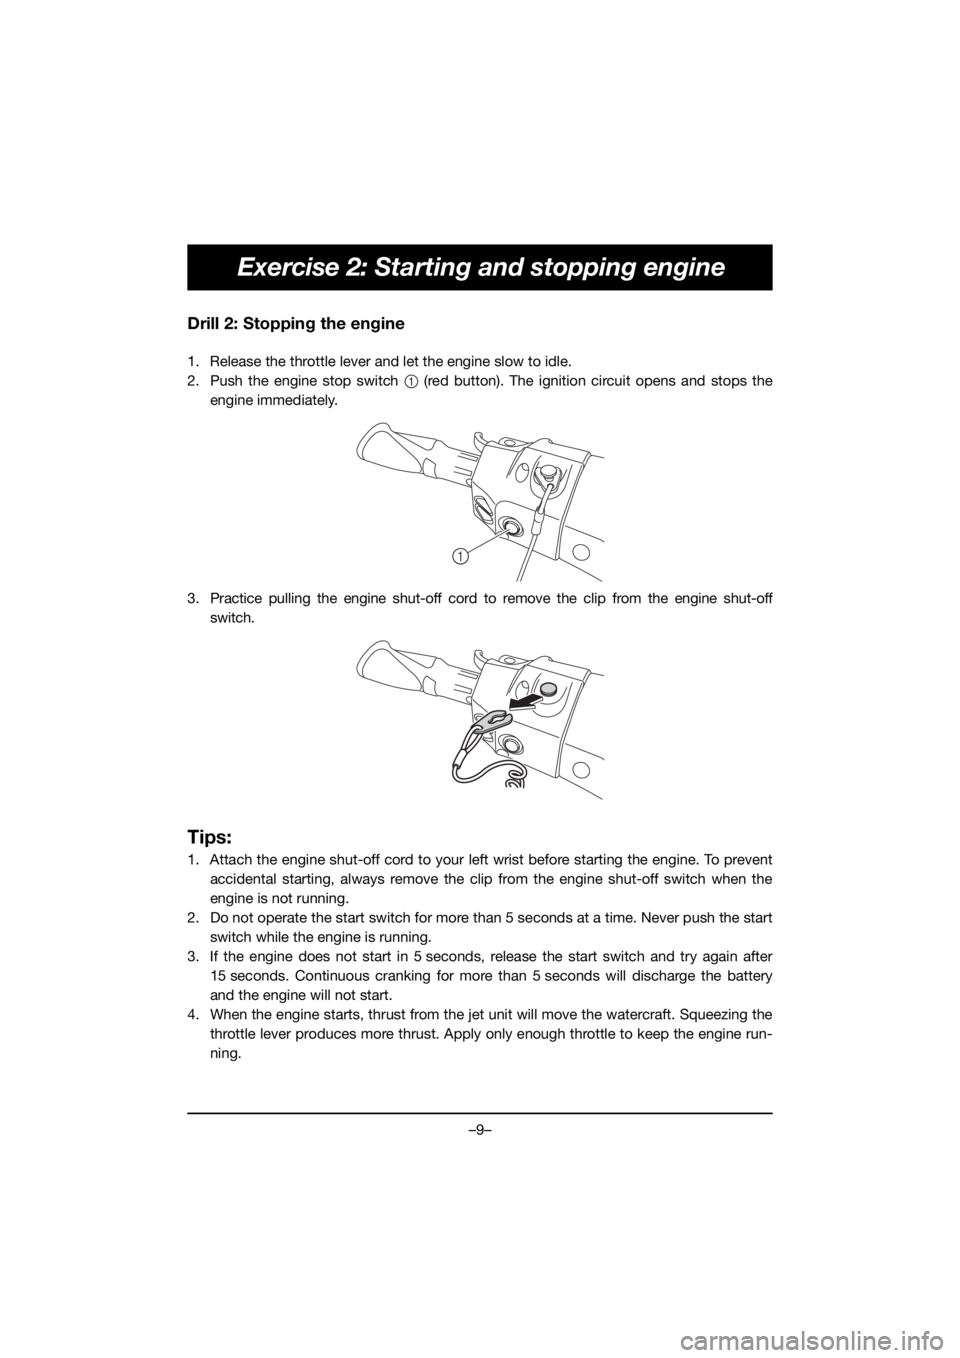 YAMAHA FX HO 2020  Owners Manual –9–
Exercise 2: Starting and stopping engine
Drill 2: Stopping the engine
1. Release the throttle lever and let the engine slow to idle.
2. Push the engine stop switch 1 (red button). The ignition